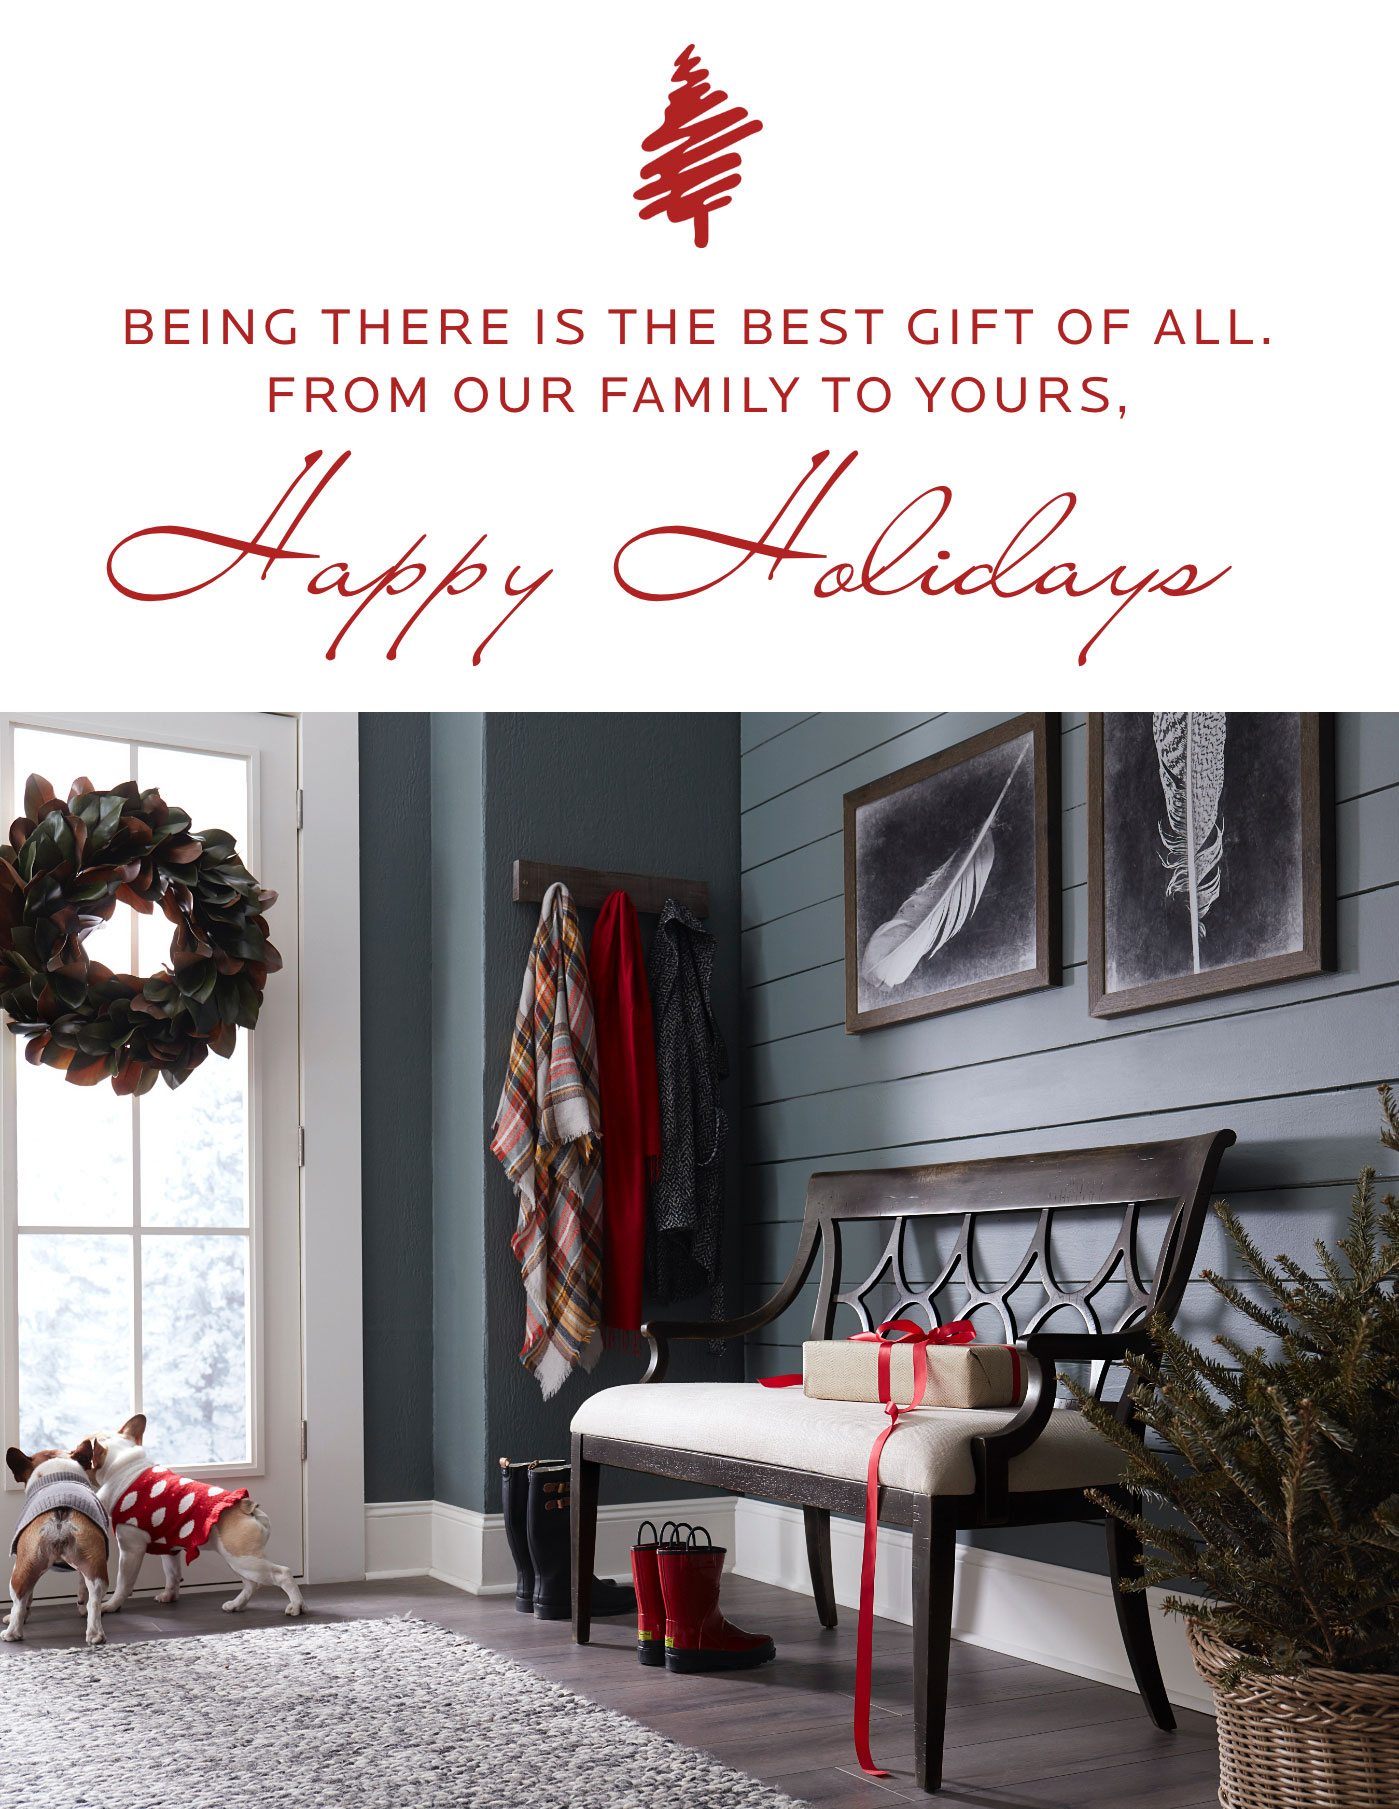 Being there is the best gift of all. From our family to yours, Happy Holidays from Bassett Furniture.